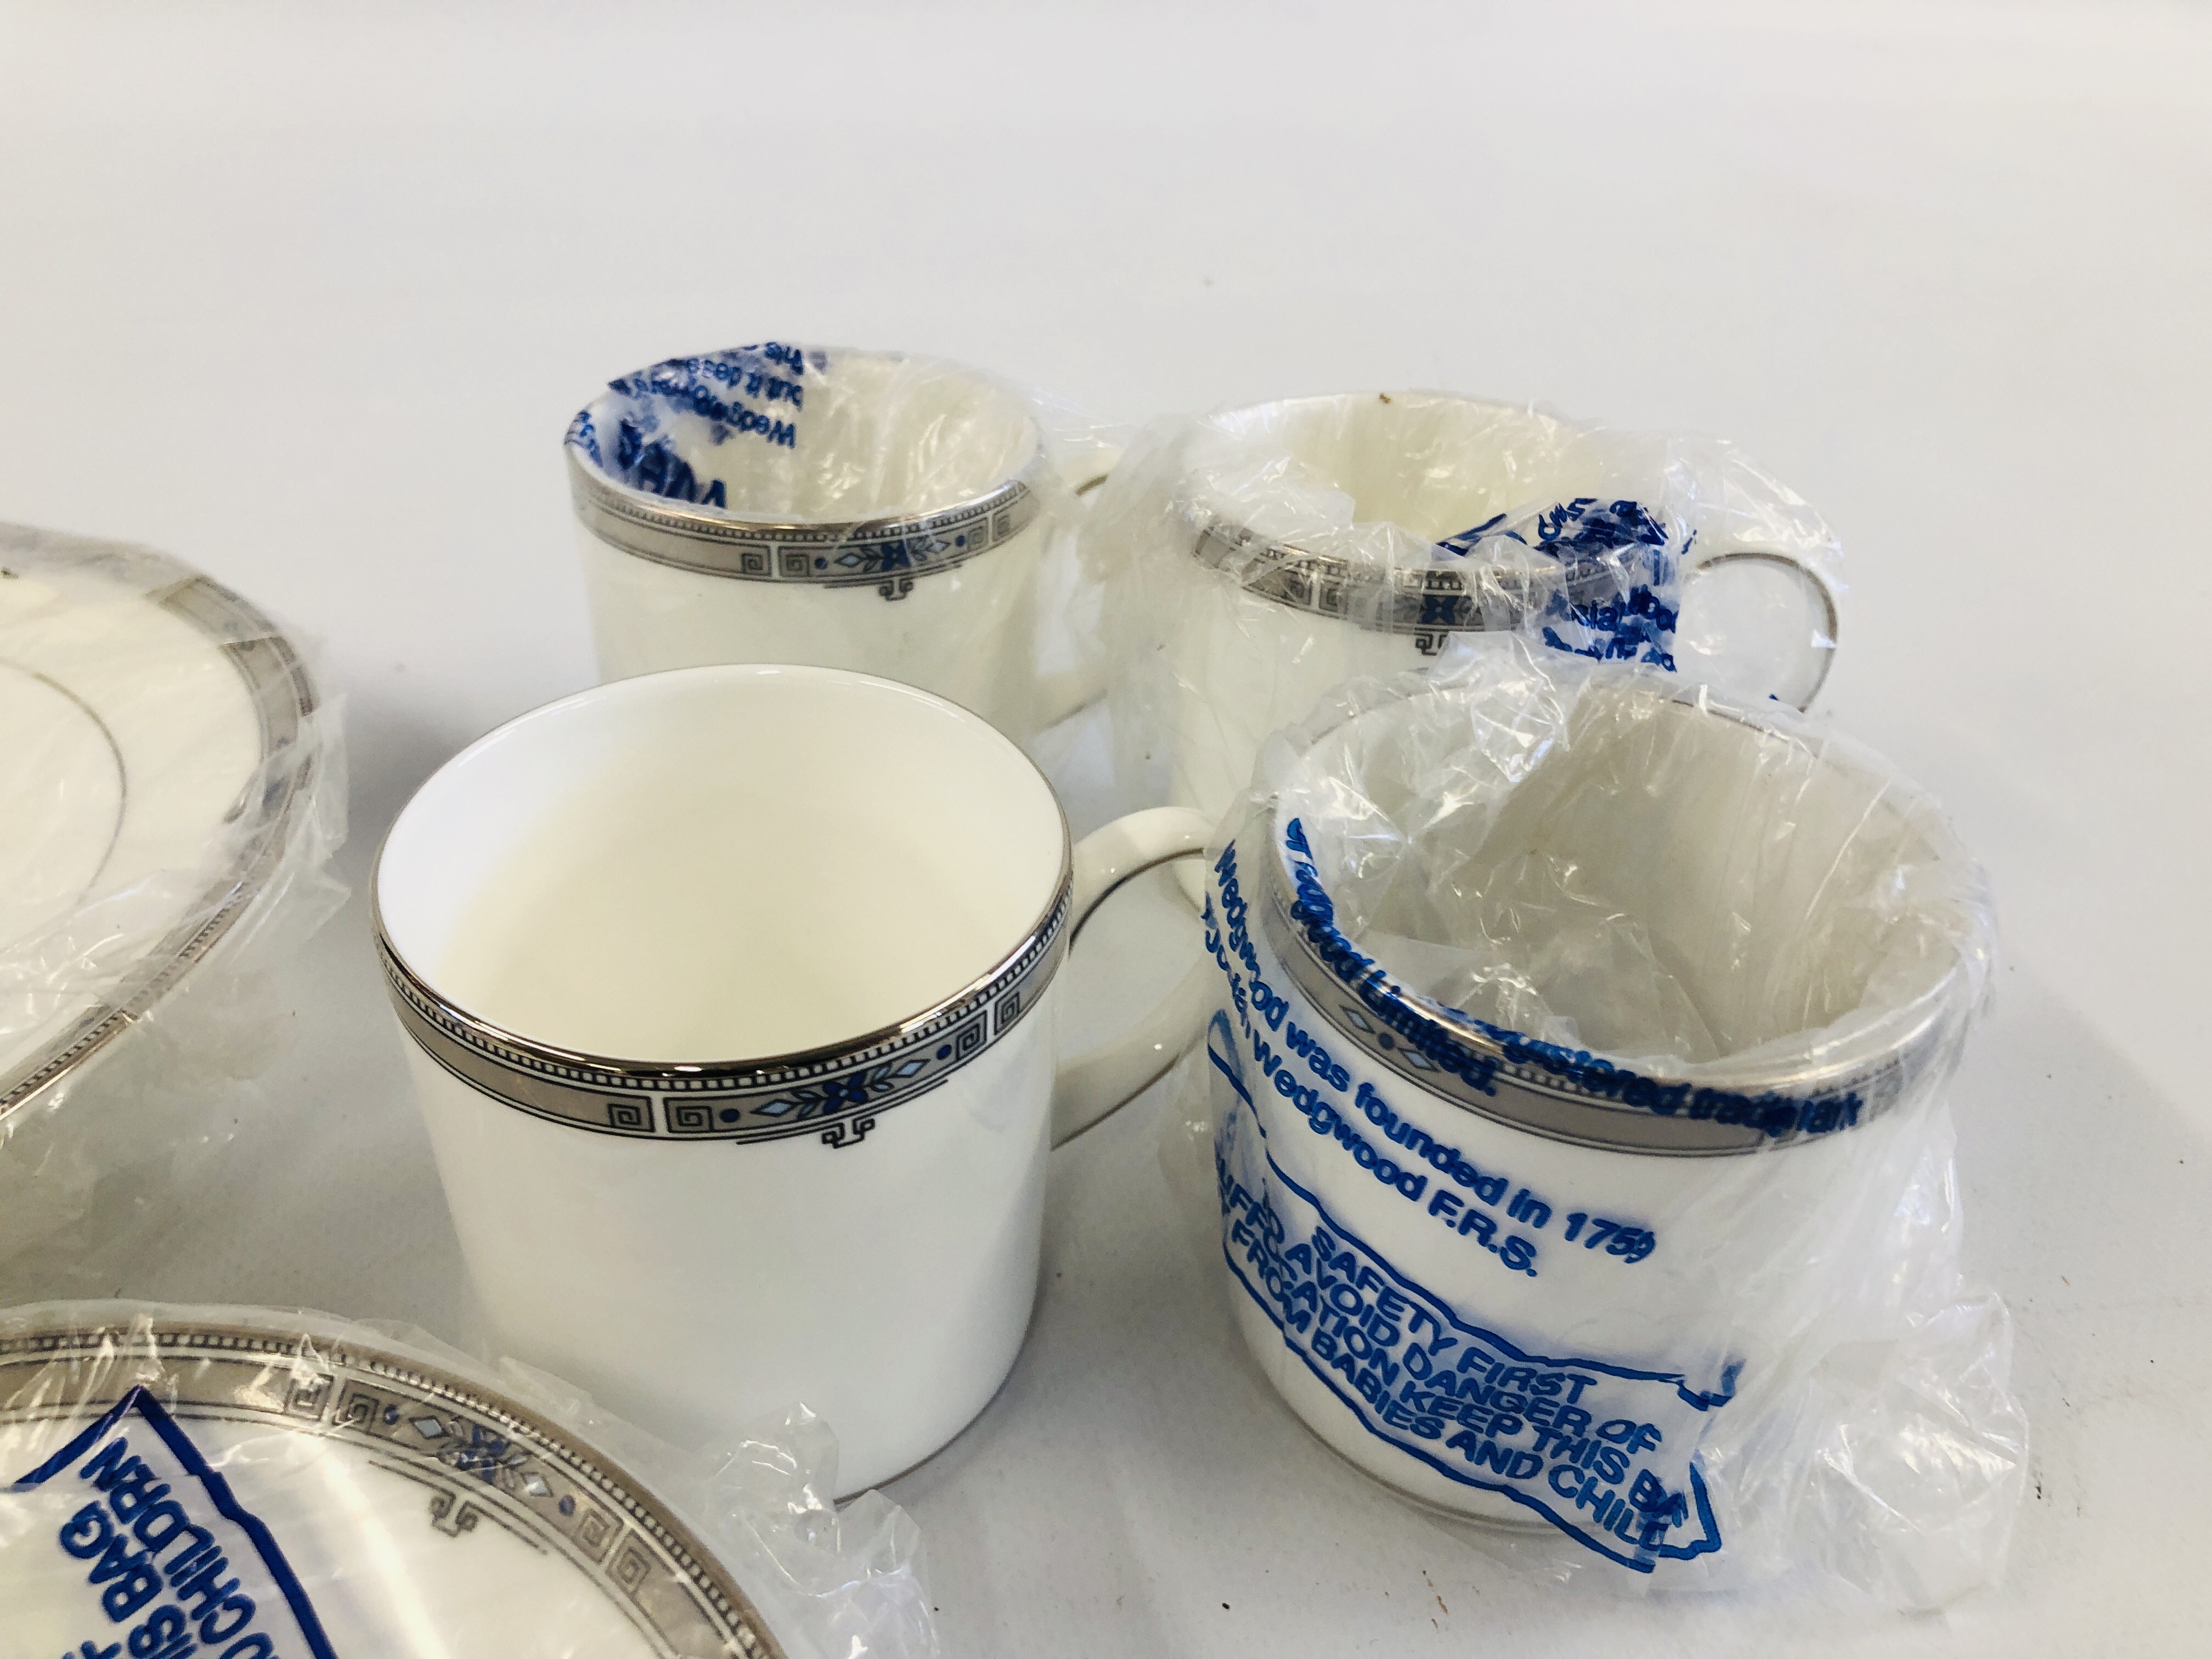 17 PIECES OF WEDGWOOD AMHERST DINNER AND COFFEE WARE INCLUDING CUPS, SAUCERS, - Image 8 of 8